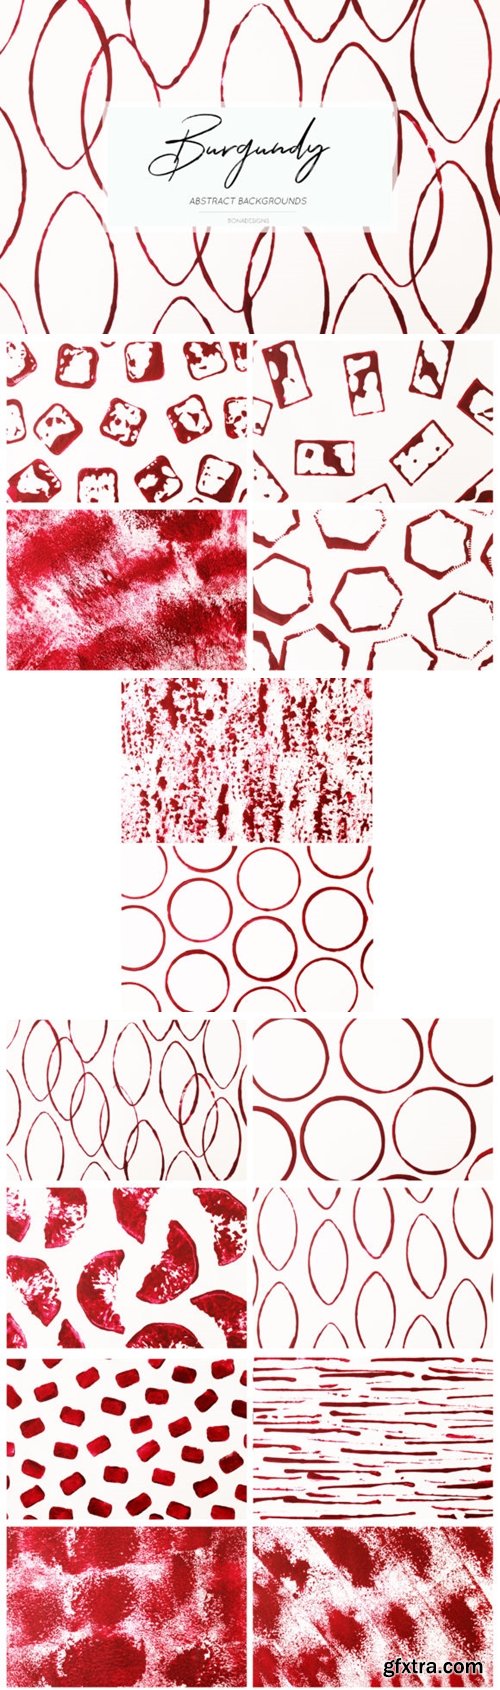 Burgundy Abstract Backgrounds 1667372